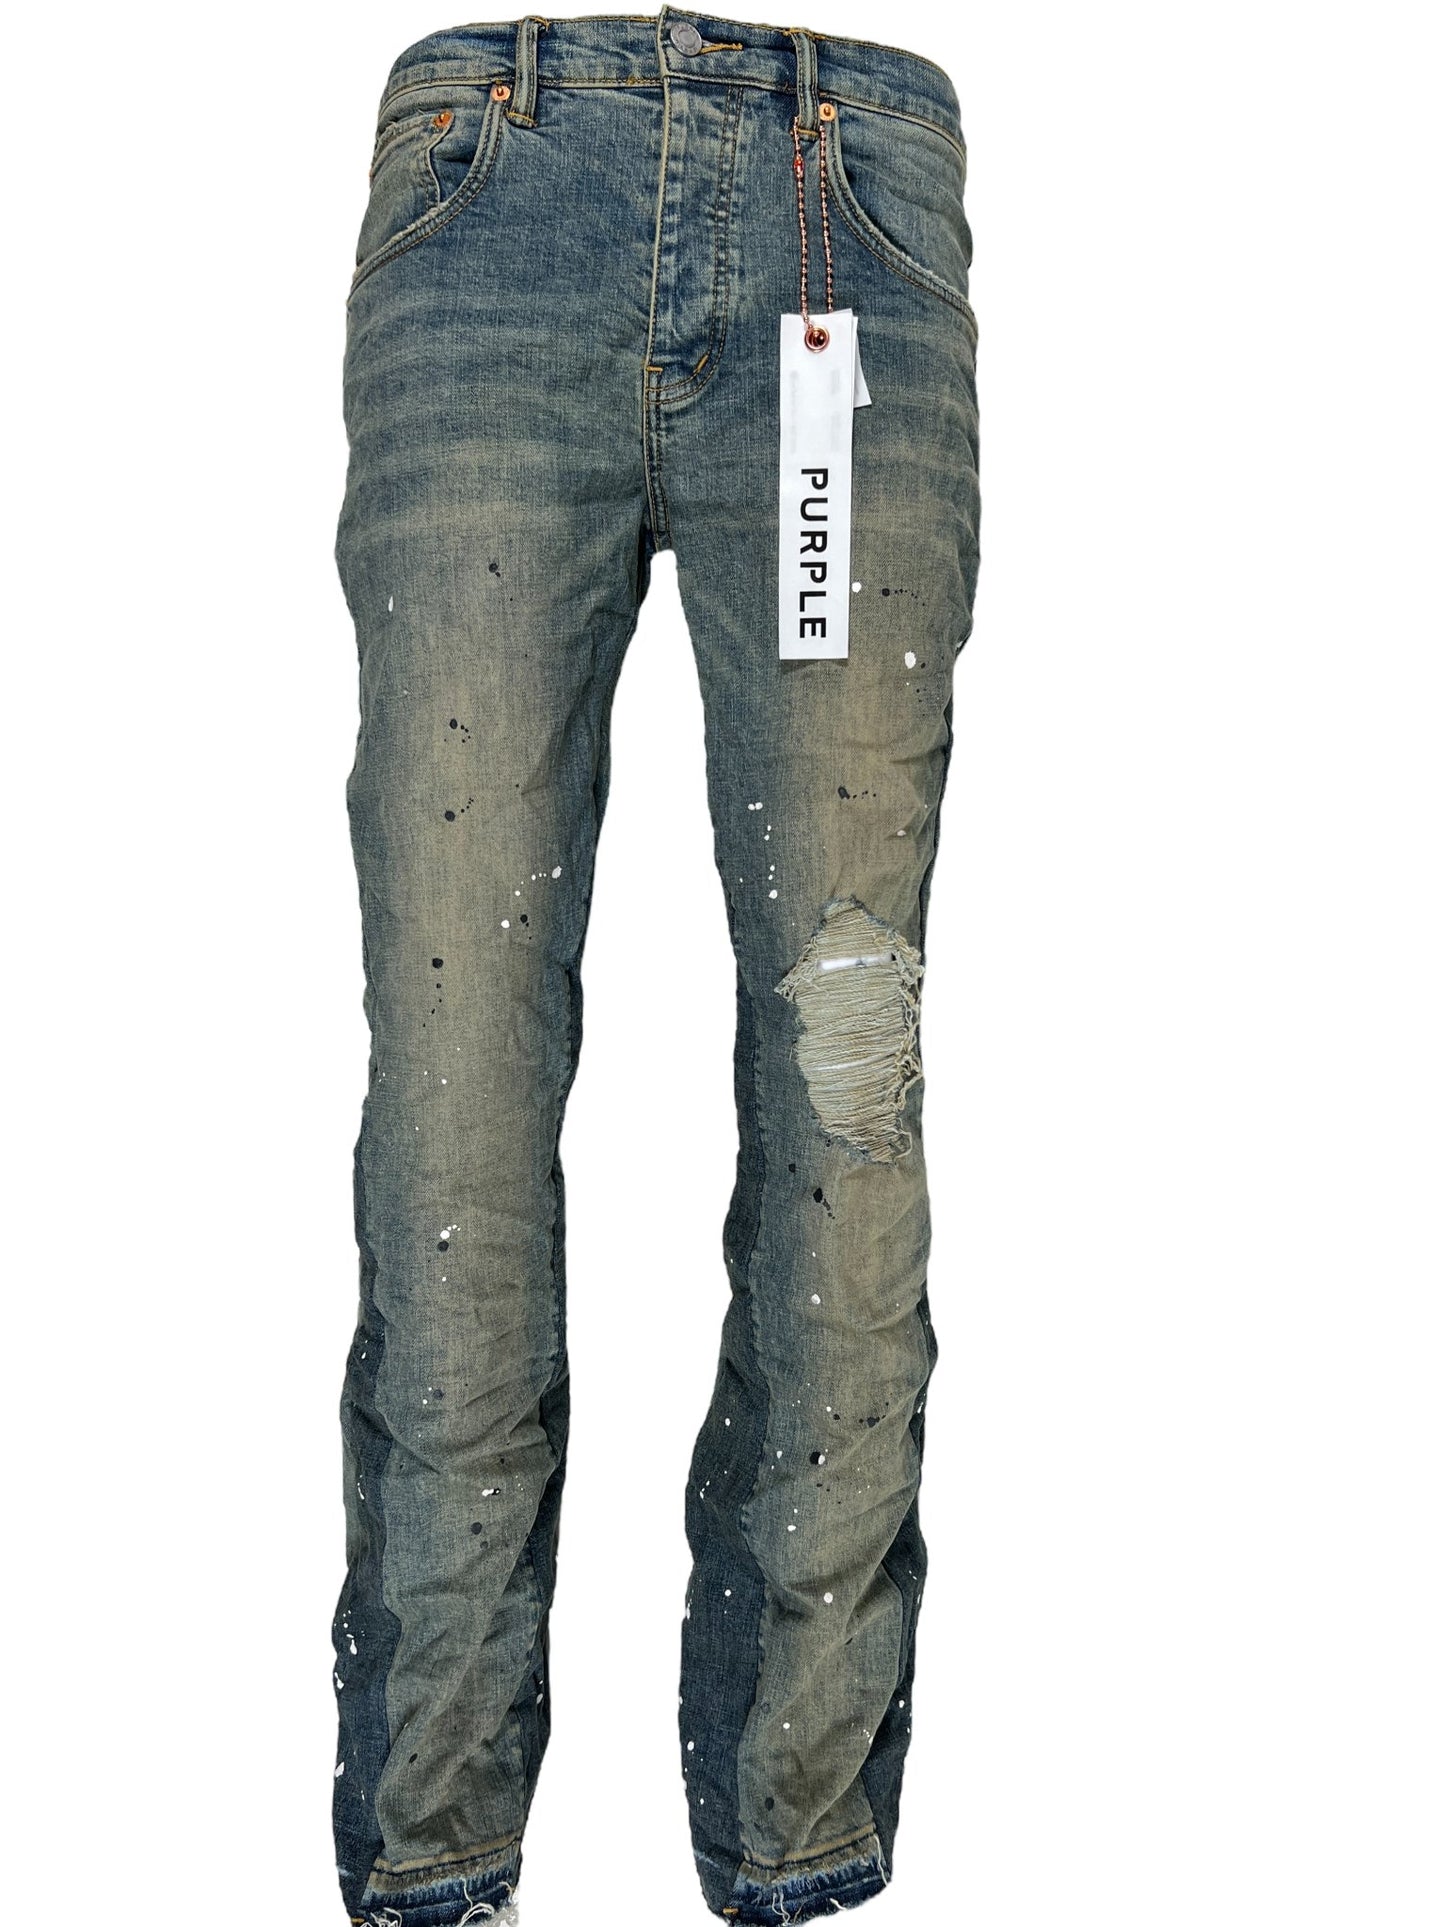 A pair of PURPLE BRAND JEANS P004-MIDD DOUBLE PANELS FLARE DESTROY INDIGO men's jeans with stains on them.